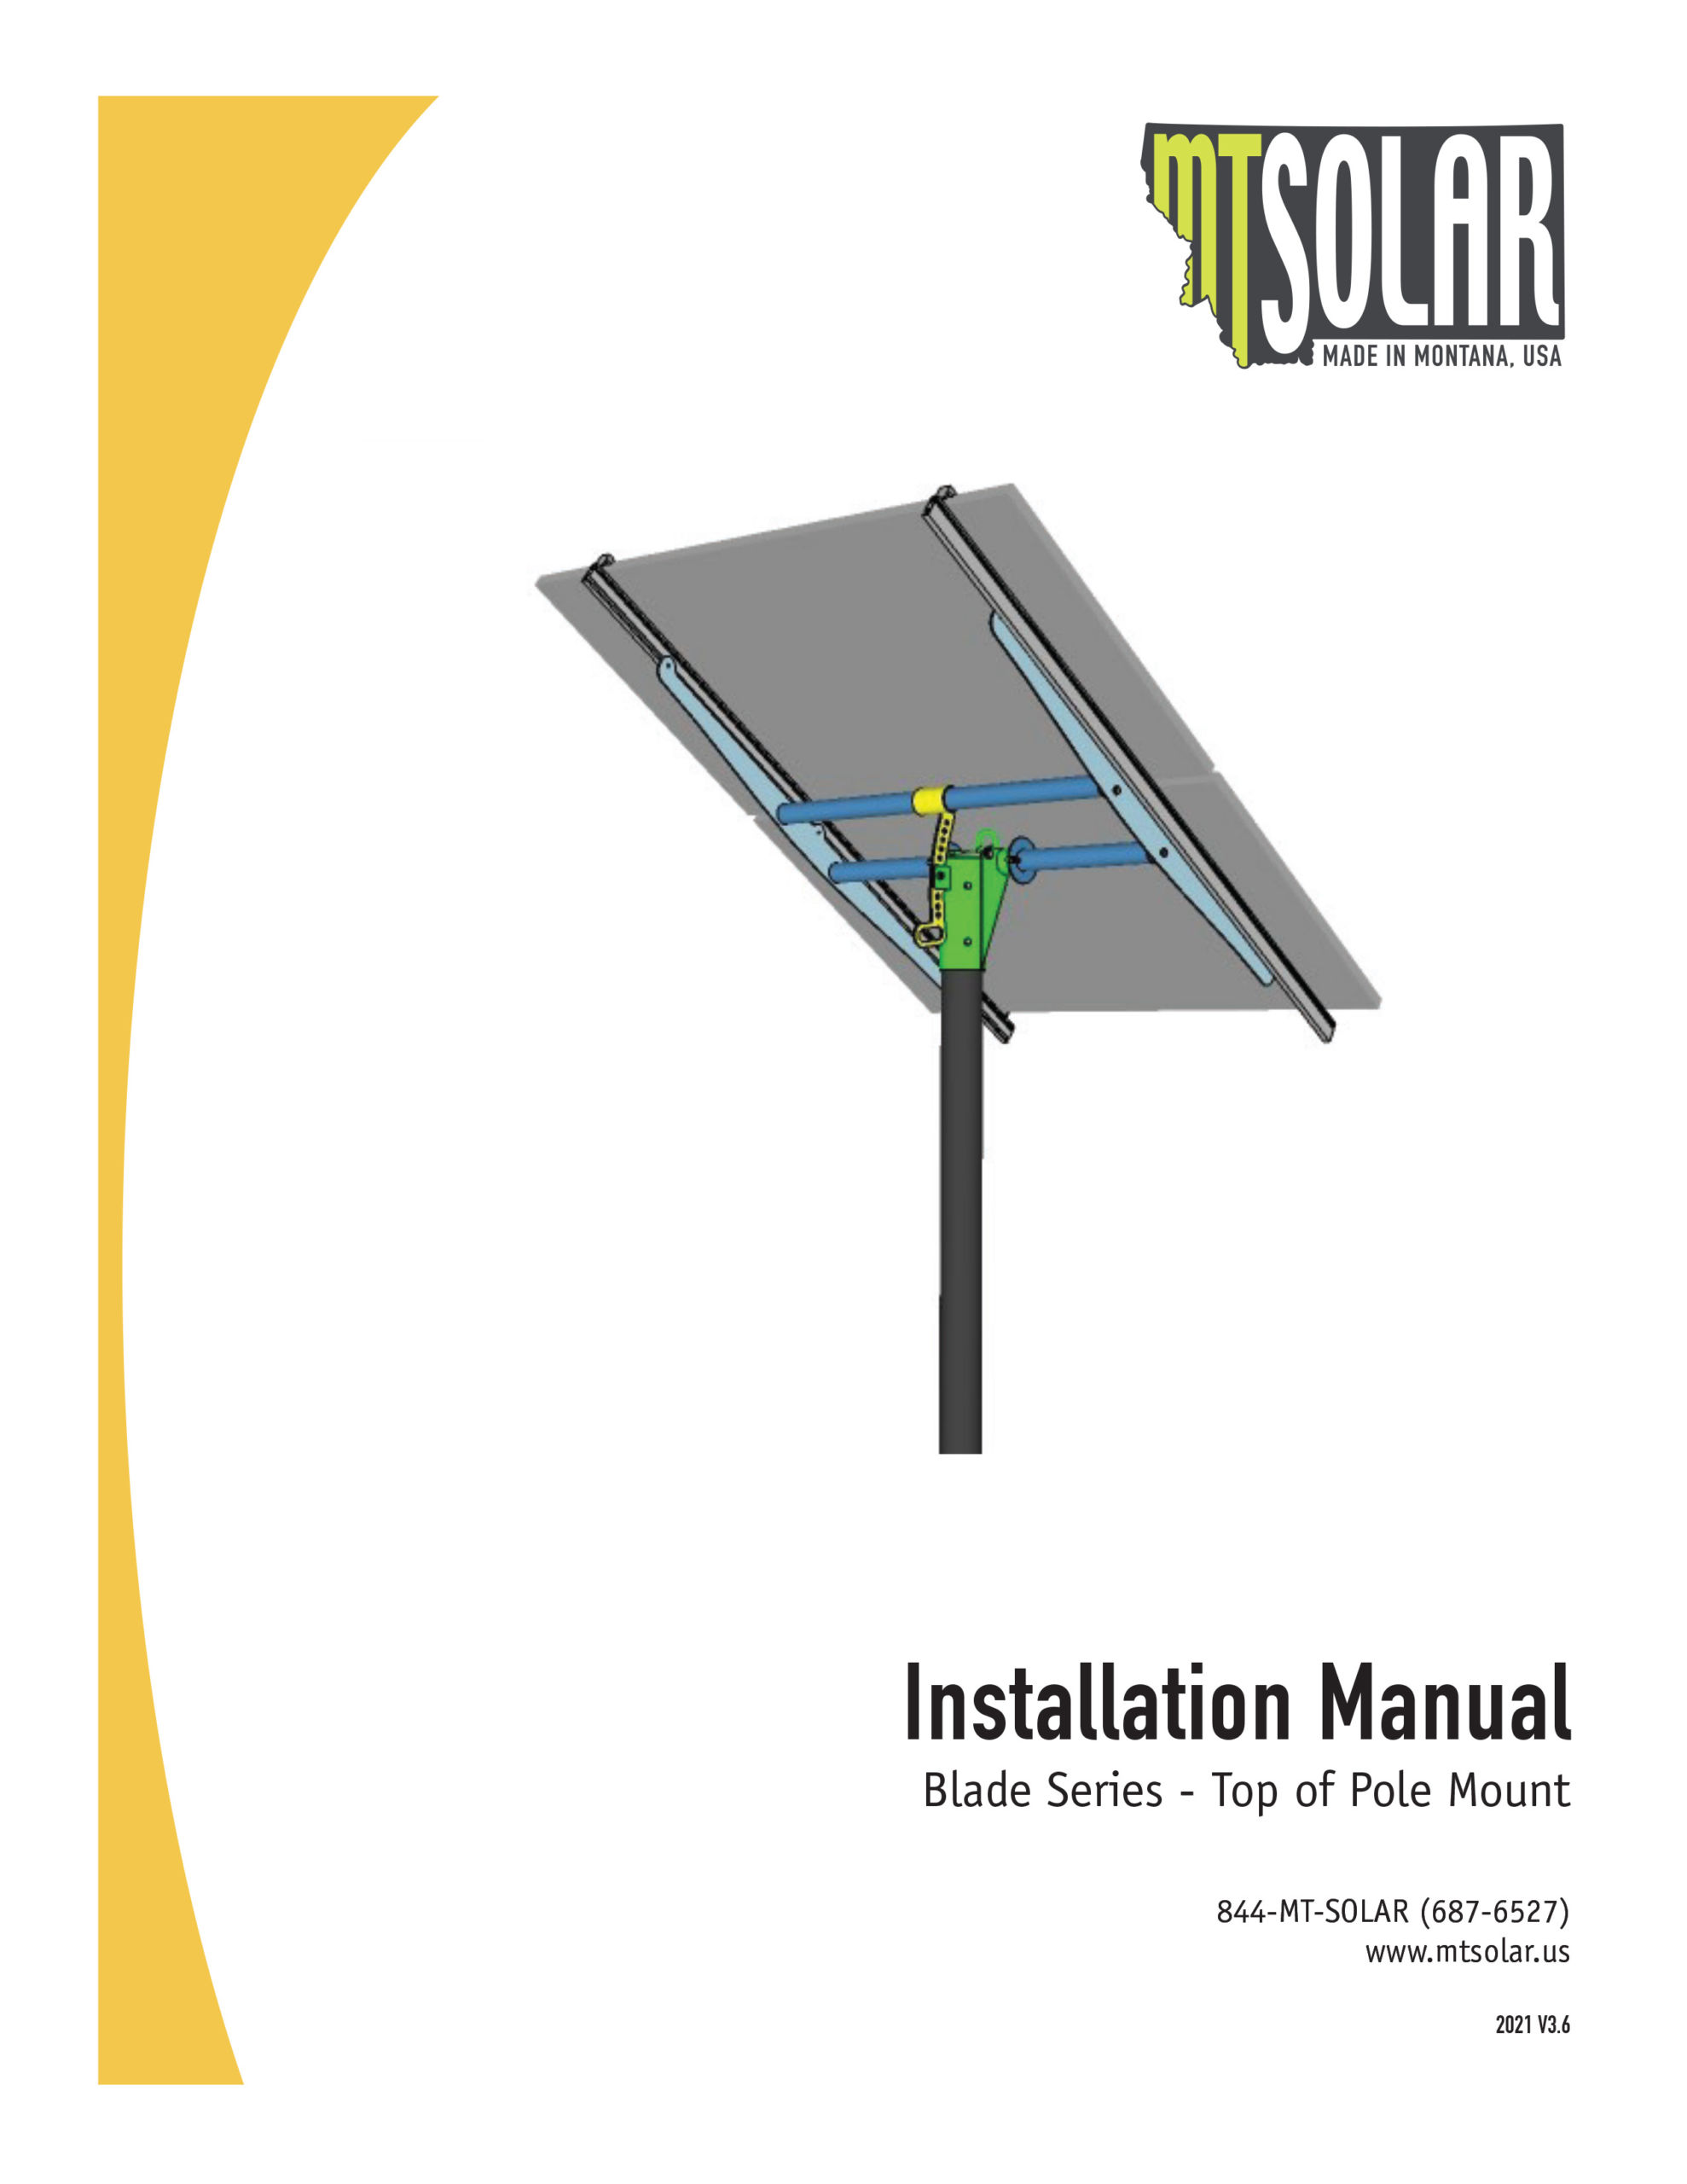 cover of blade series installation manual